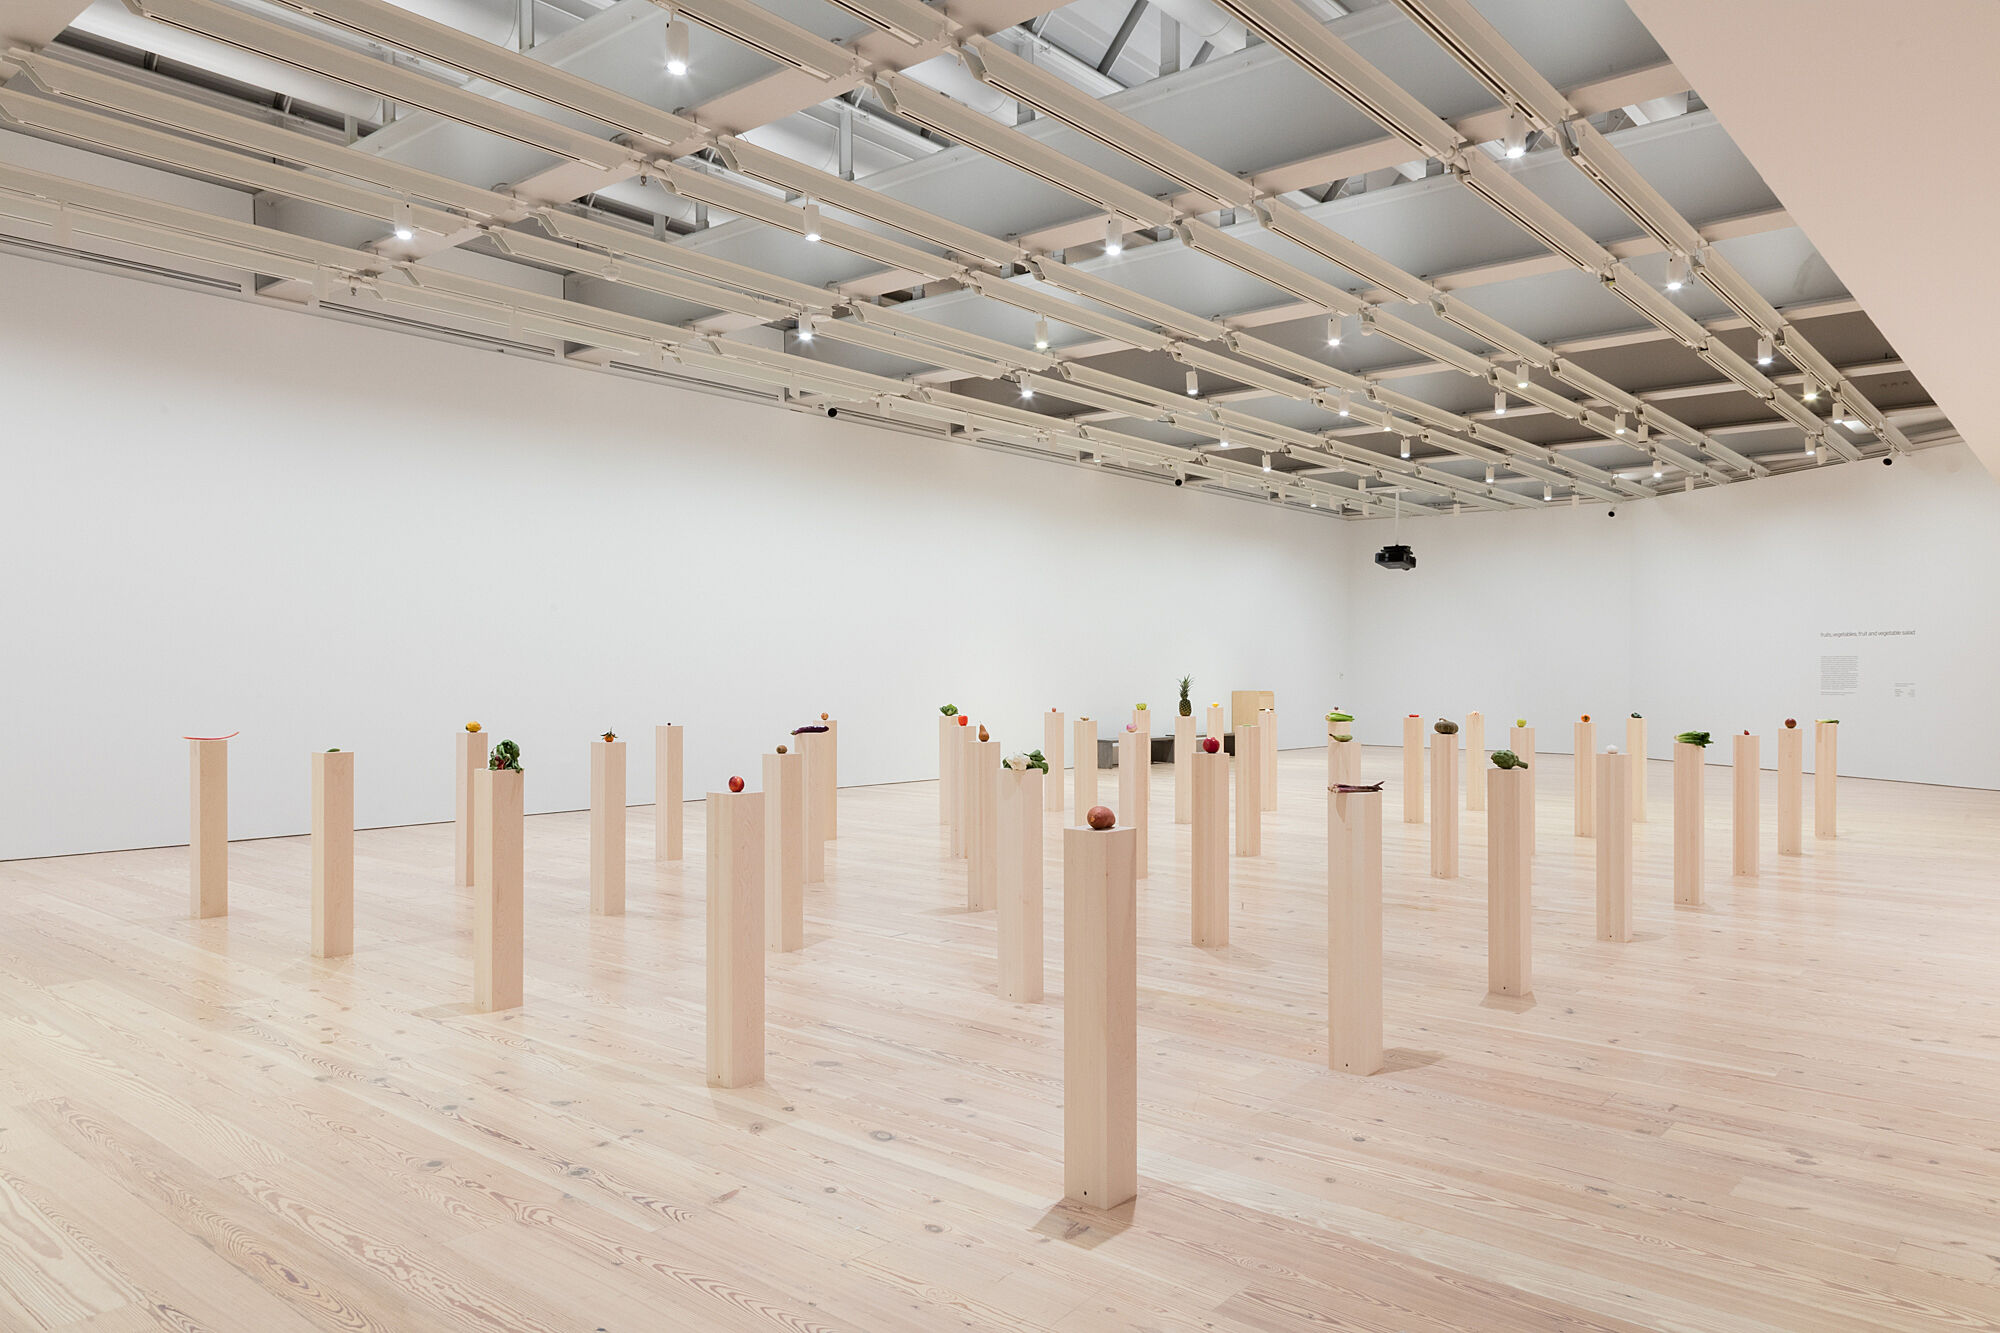 A photo of a gallery full of assorted vegetables and fruits on plinths.